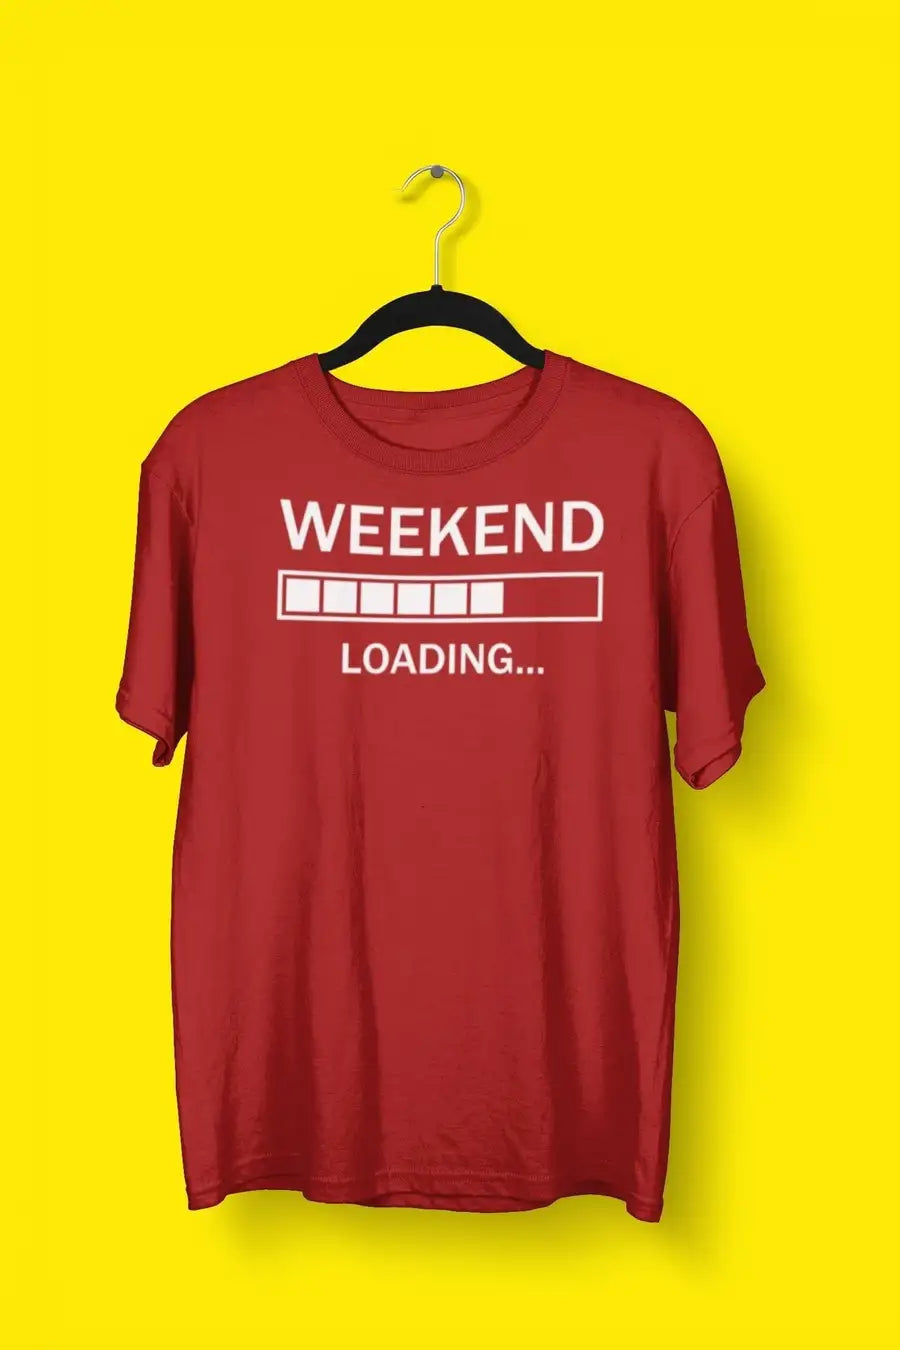 Weekend Loading T Shirt for Men and Women | Premium Design | Catch My Drift India - Catch My Drift India Clothing black, clothing, engineer, engineering, funny, general, made in india, multi 